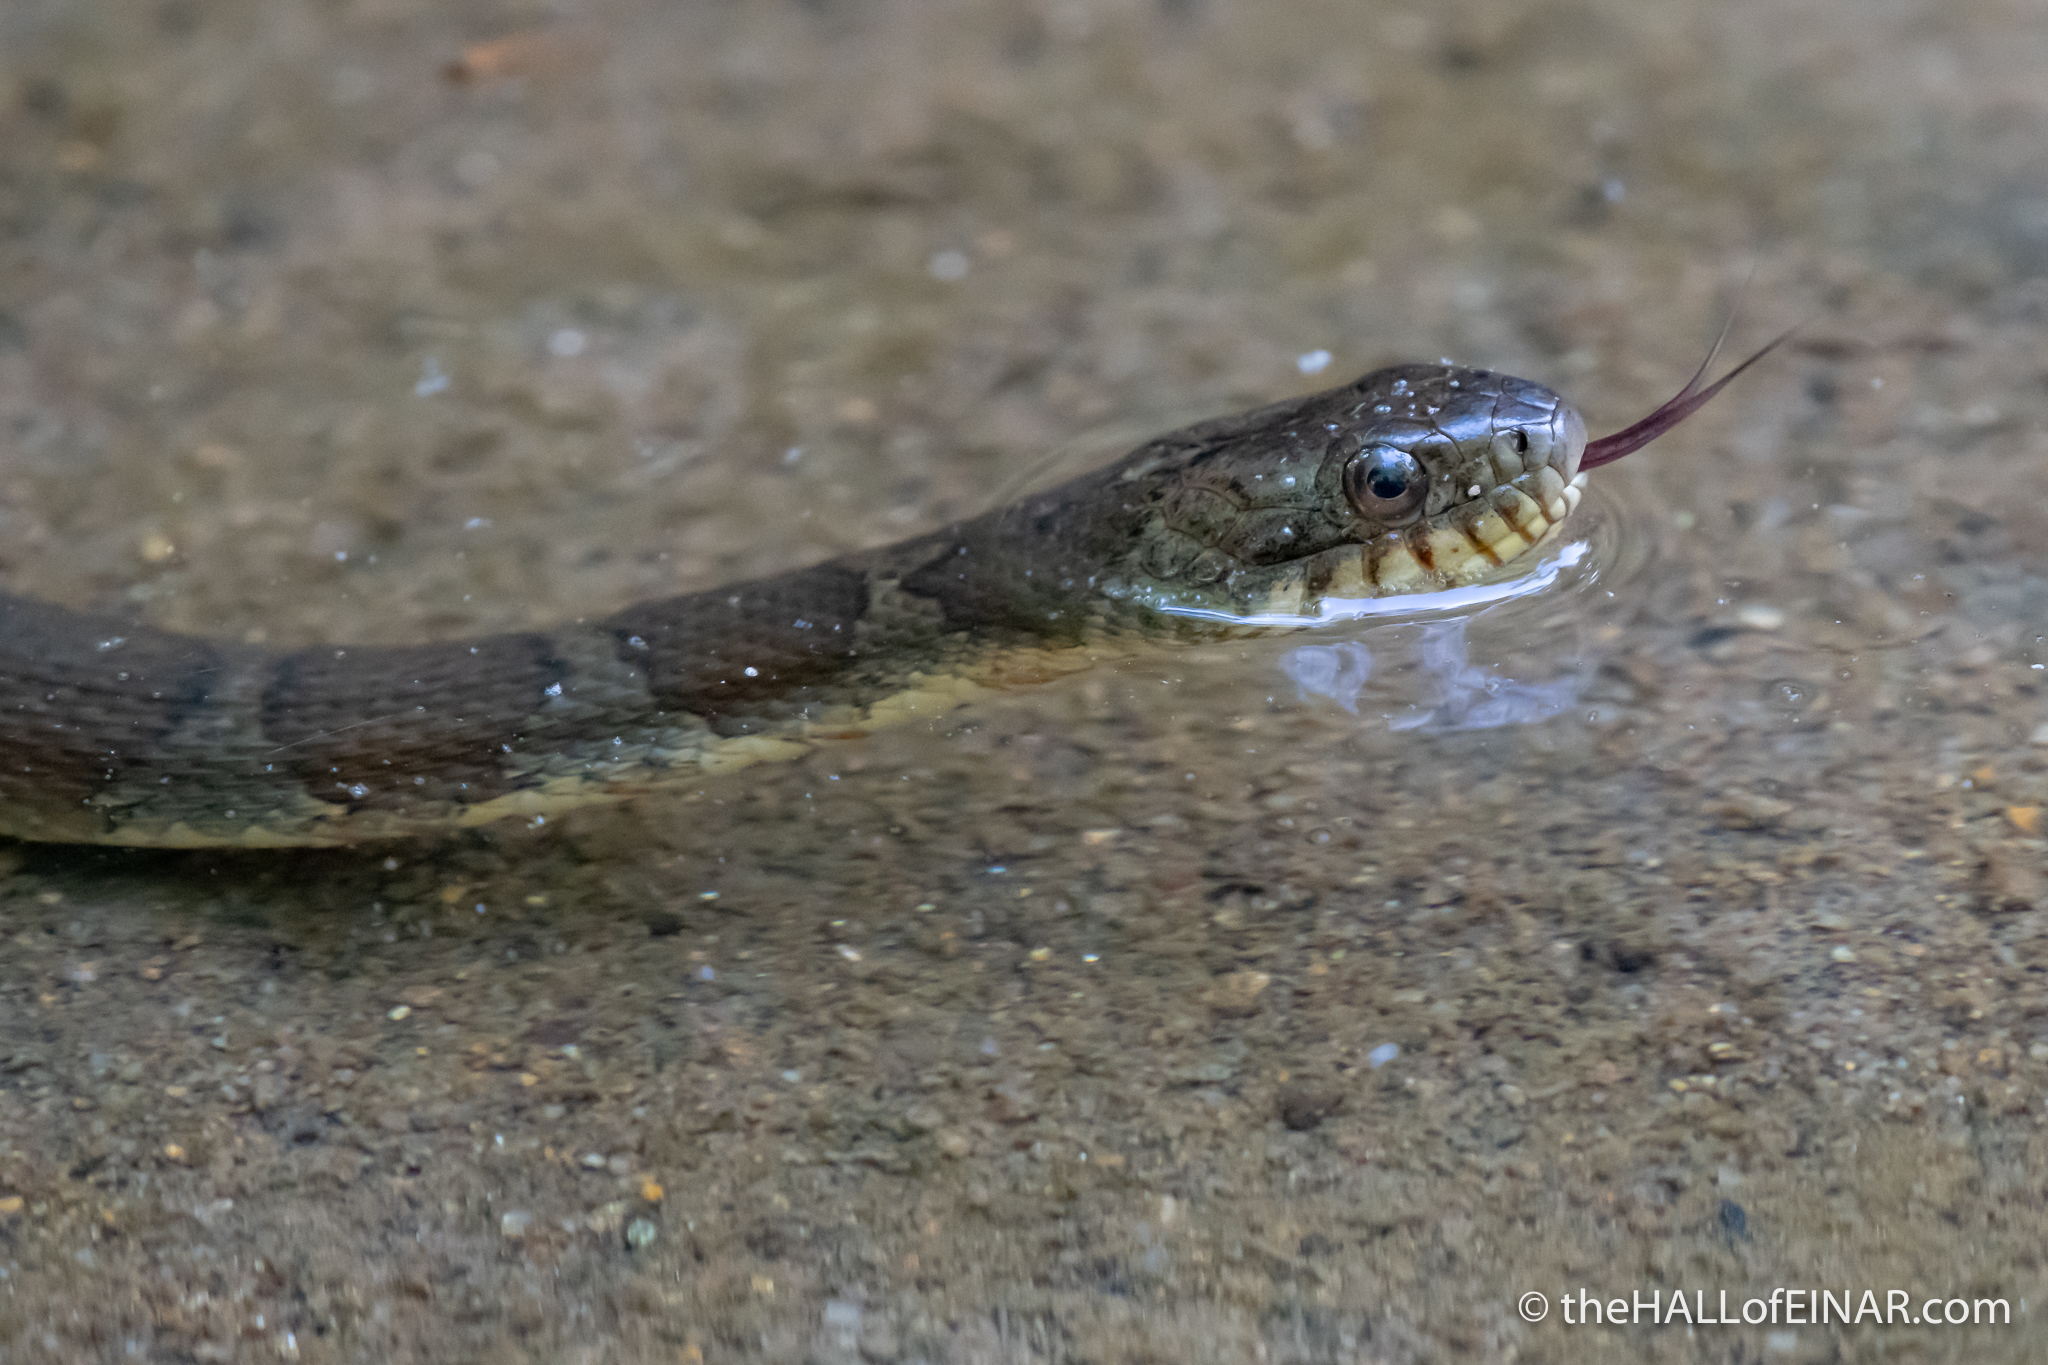 Northern Watersnake - The Hall of Einar - photograph (c) David Bailey (not the)